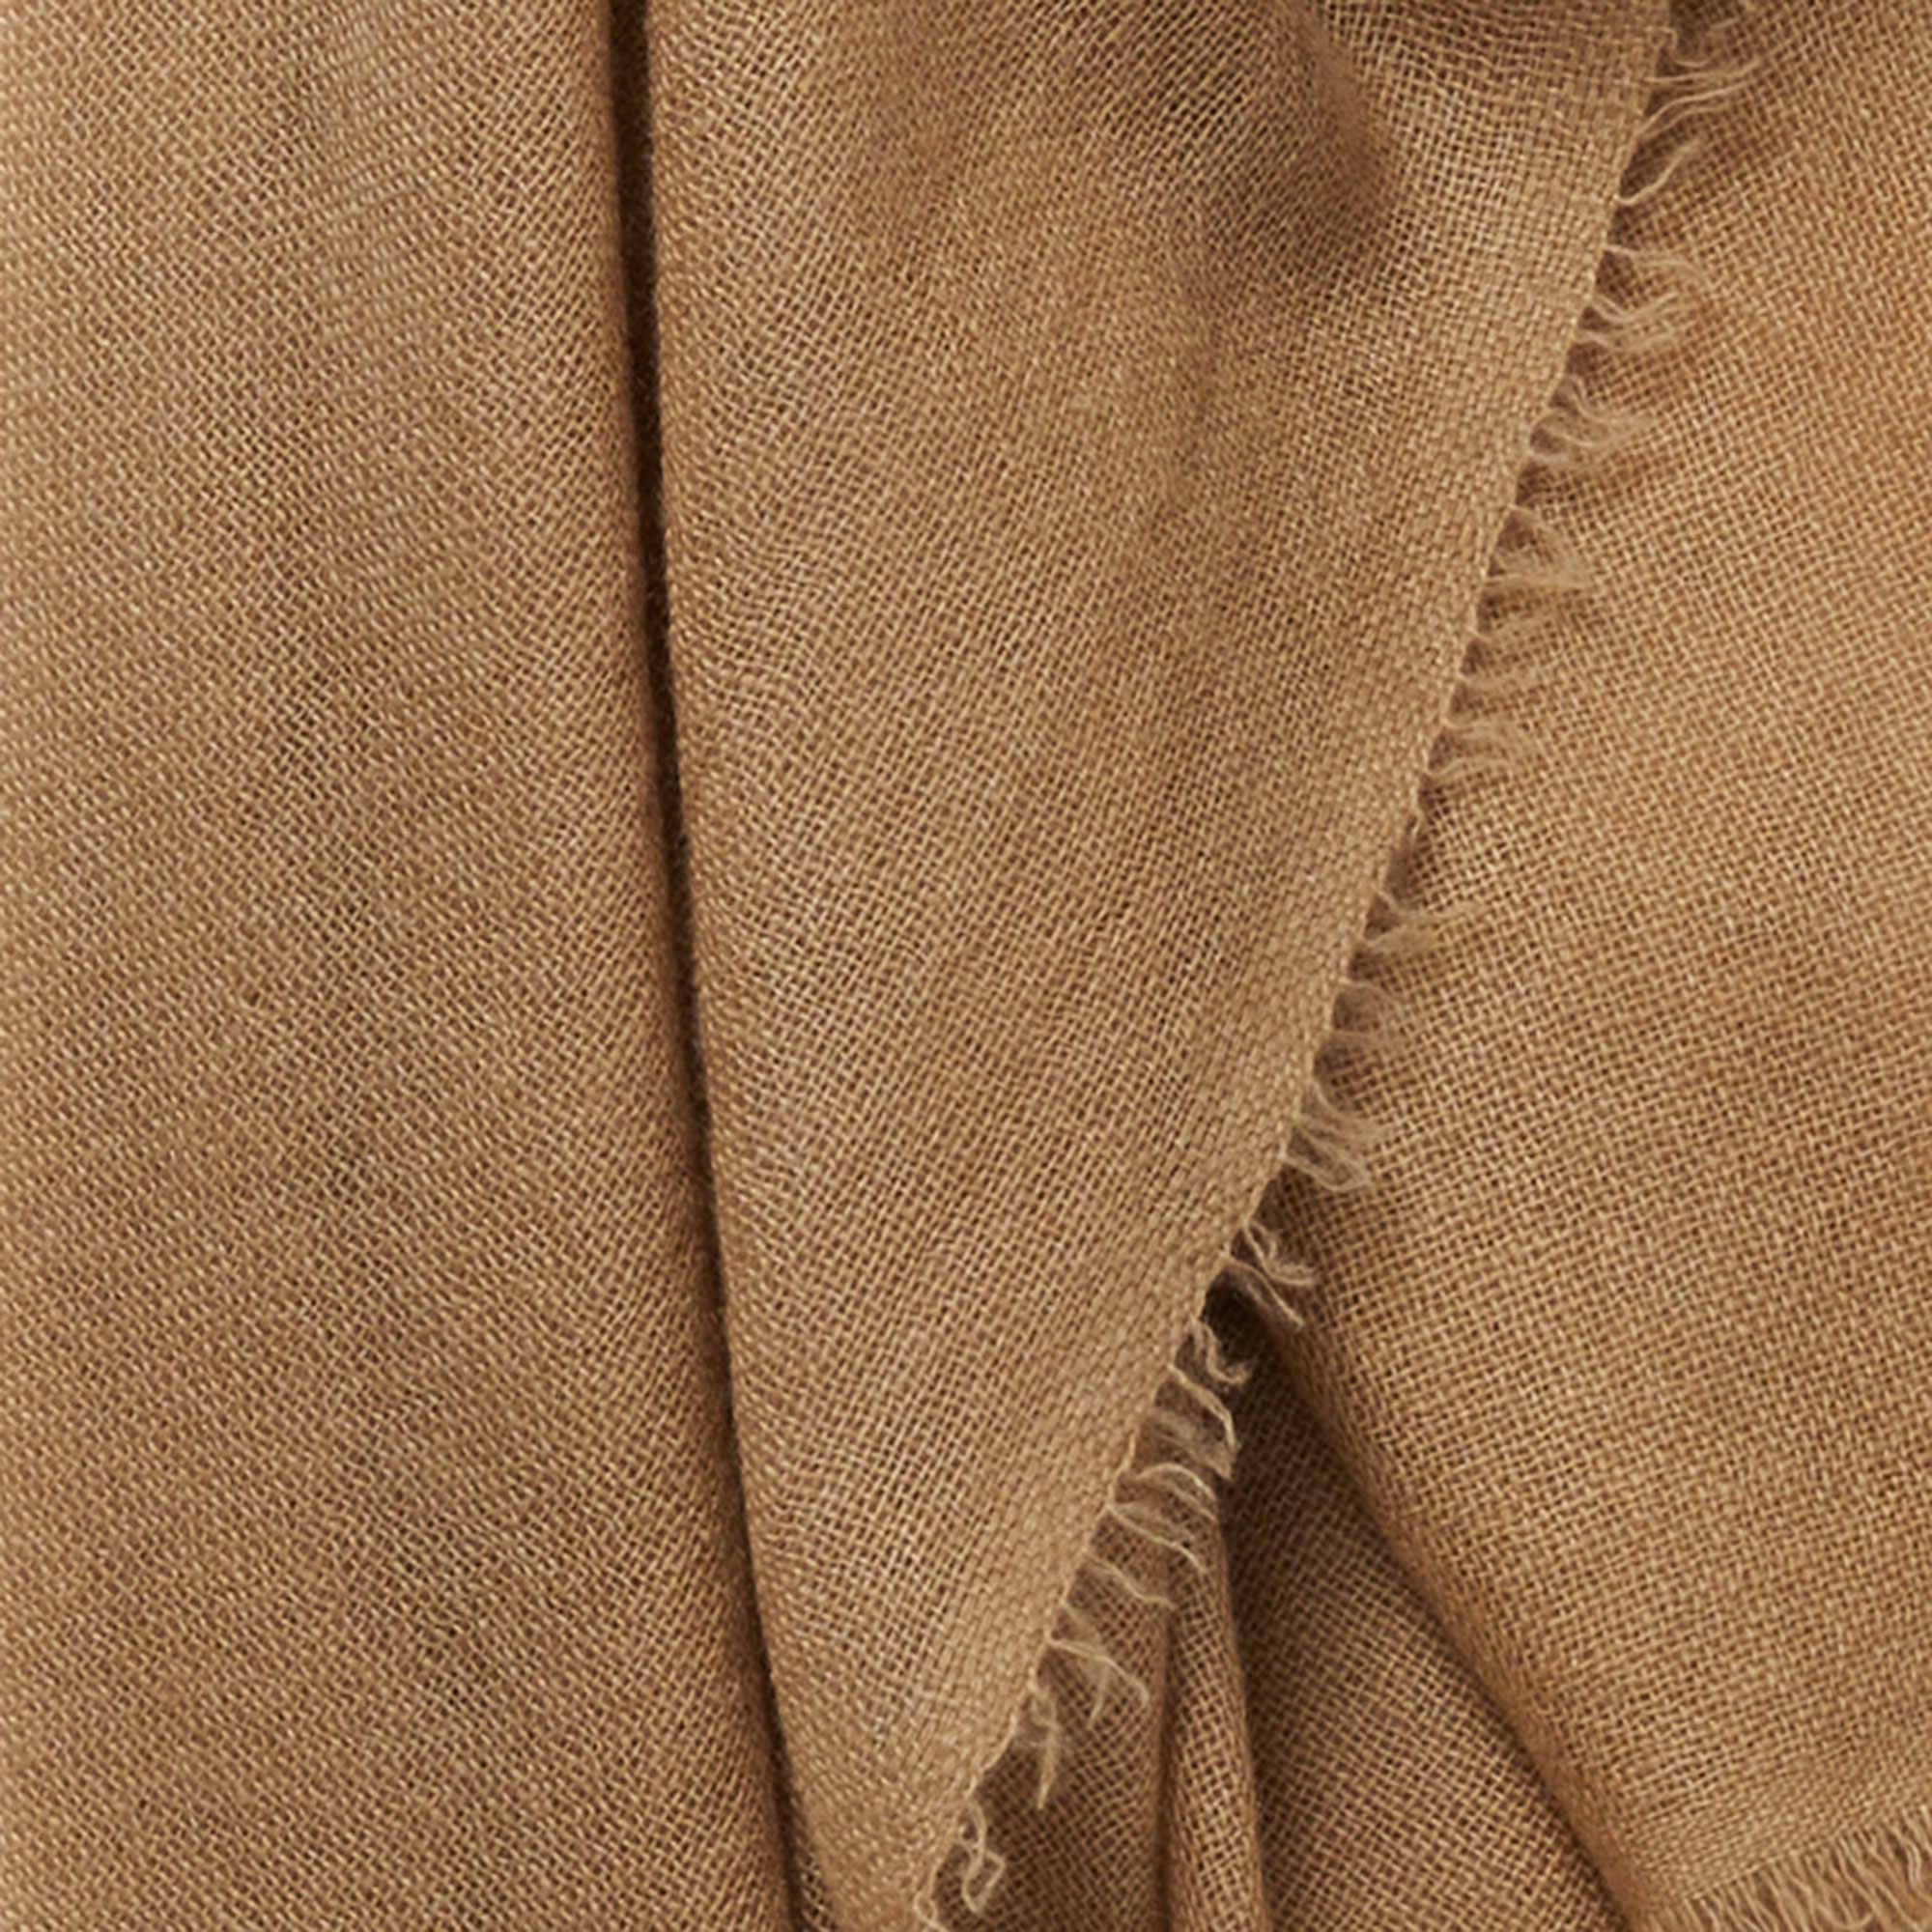 The Sheer Fray Cashmere Scarf